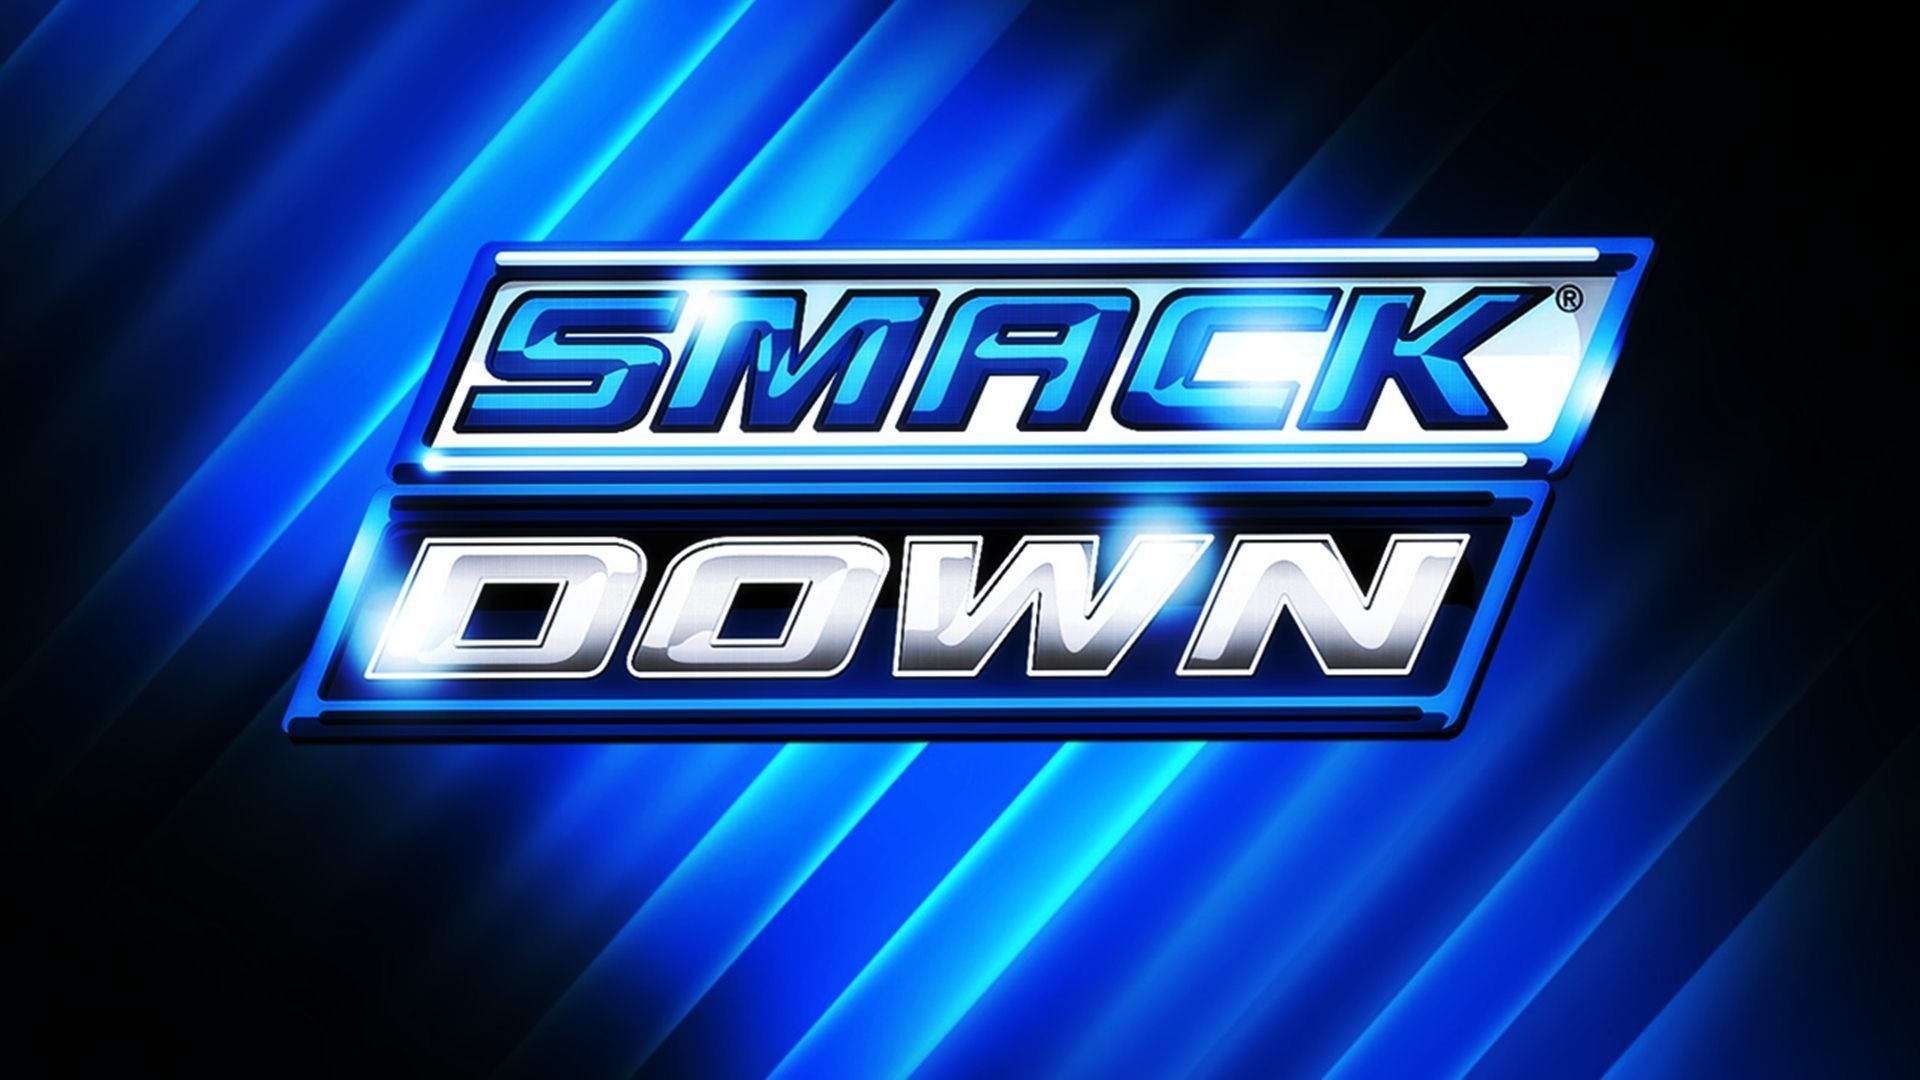 WWE SmackDown, Smackdown wallpapers, Background pictures, Wrestling, 1920x1080 Full HD Desktop